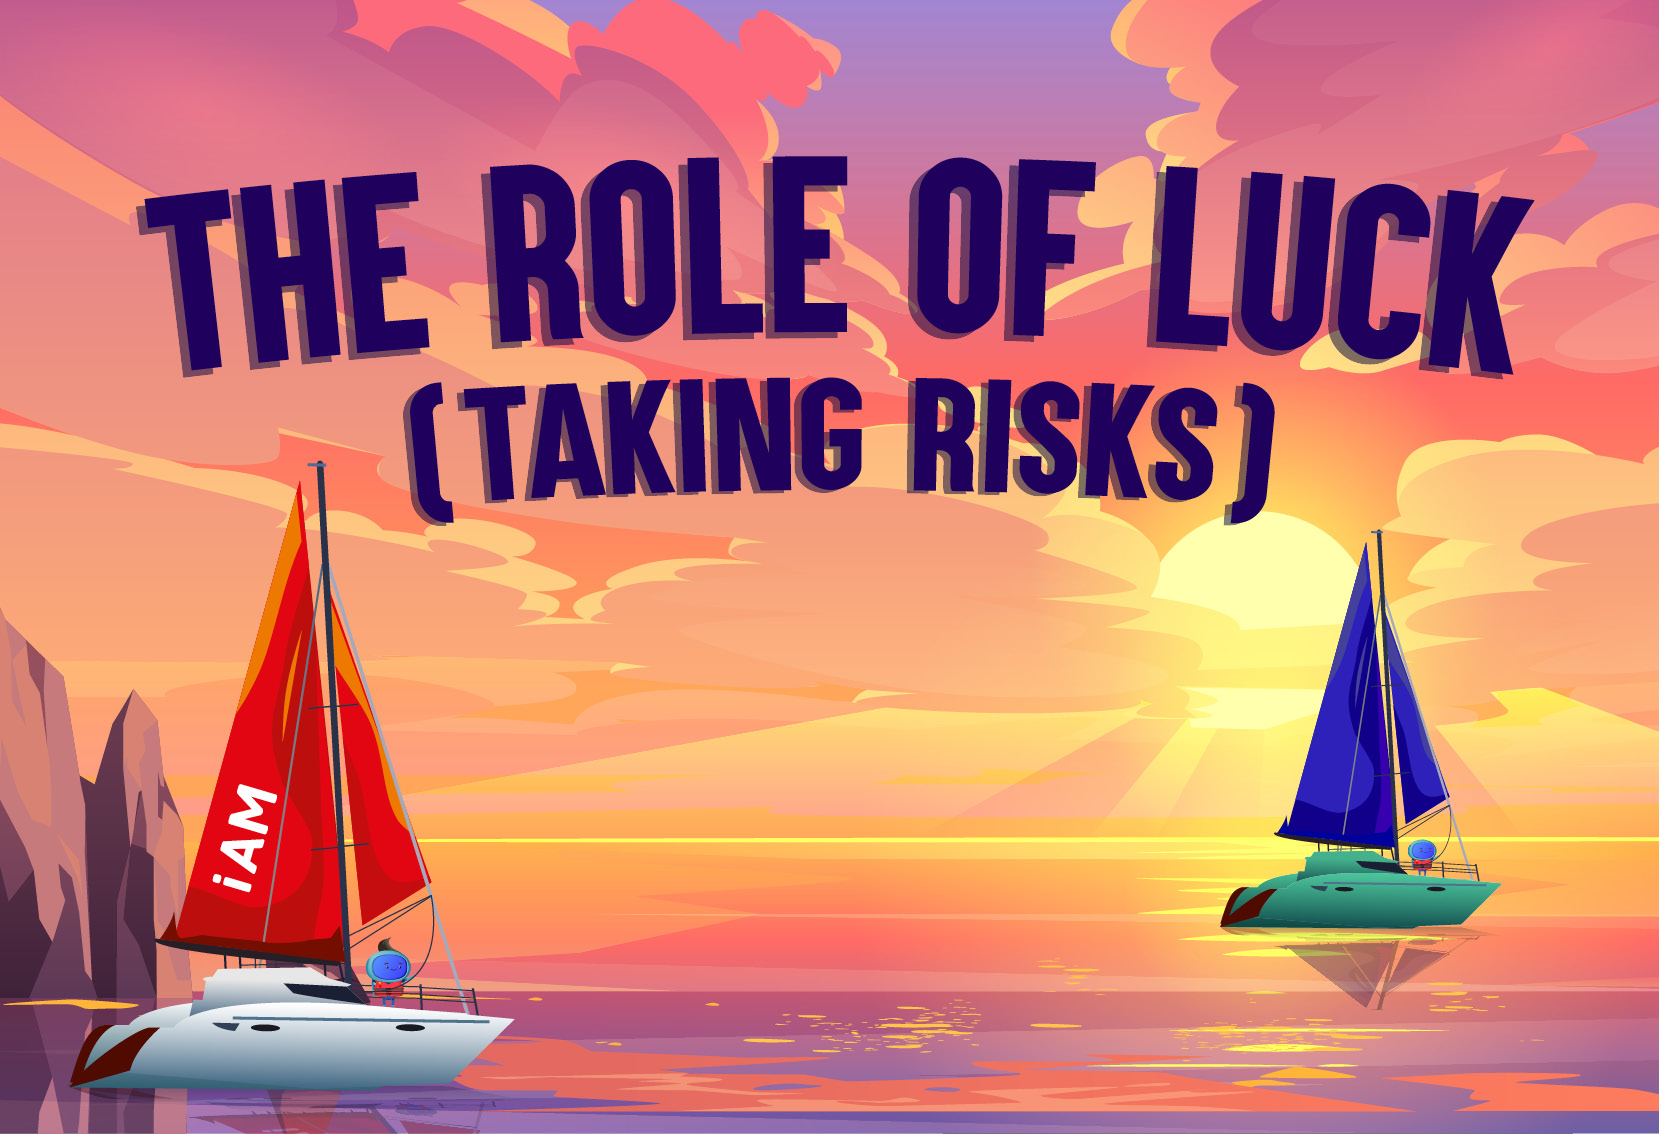 iAM 00233 - The Role of Luck (Taking Risks) - LMS Thumbnail